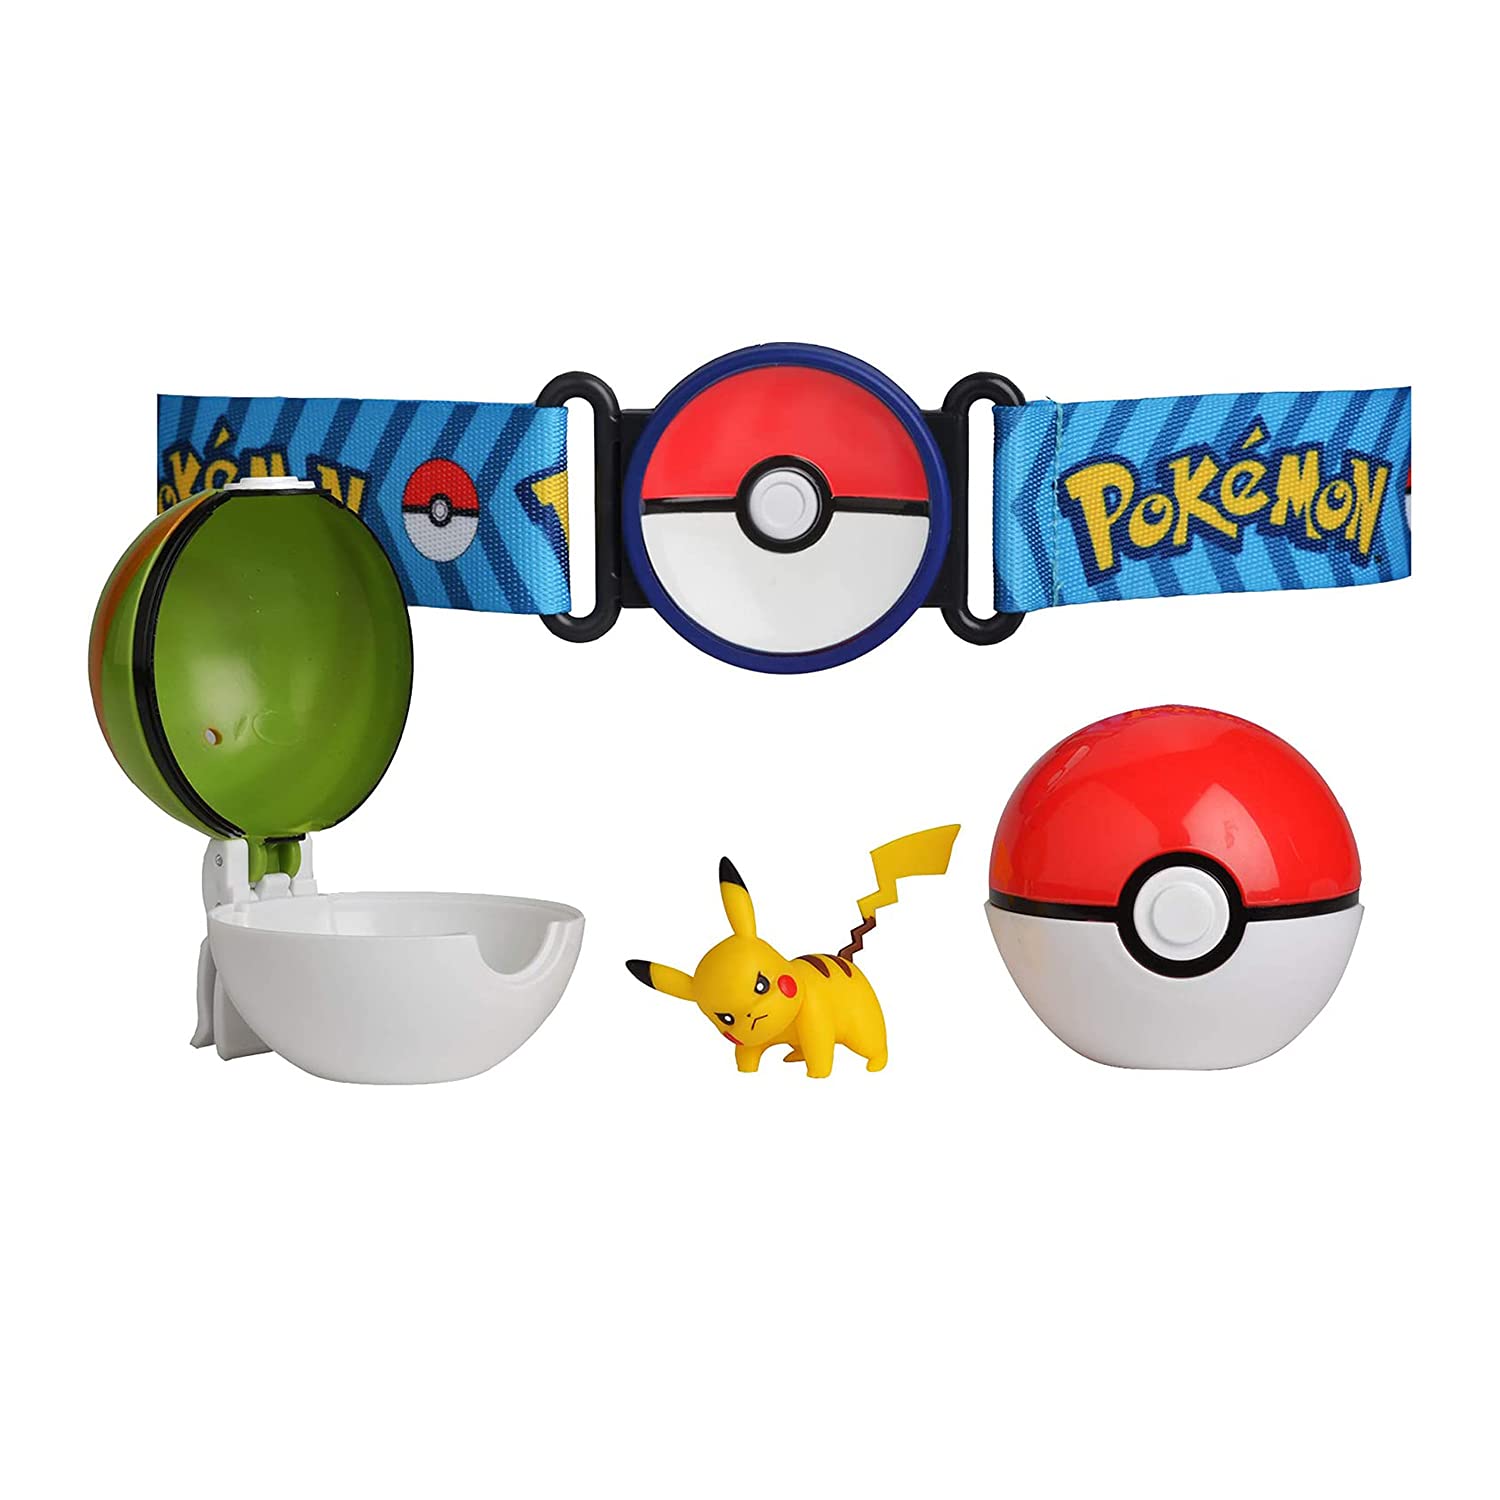 Pokemon Clip 'N' Go Poke Ball Belt Set, Comes with Poke Ball, Nest Ball and 2-Inch Pikachu Figure- Perfect for any Trainer